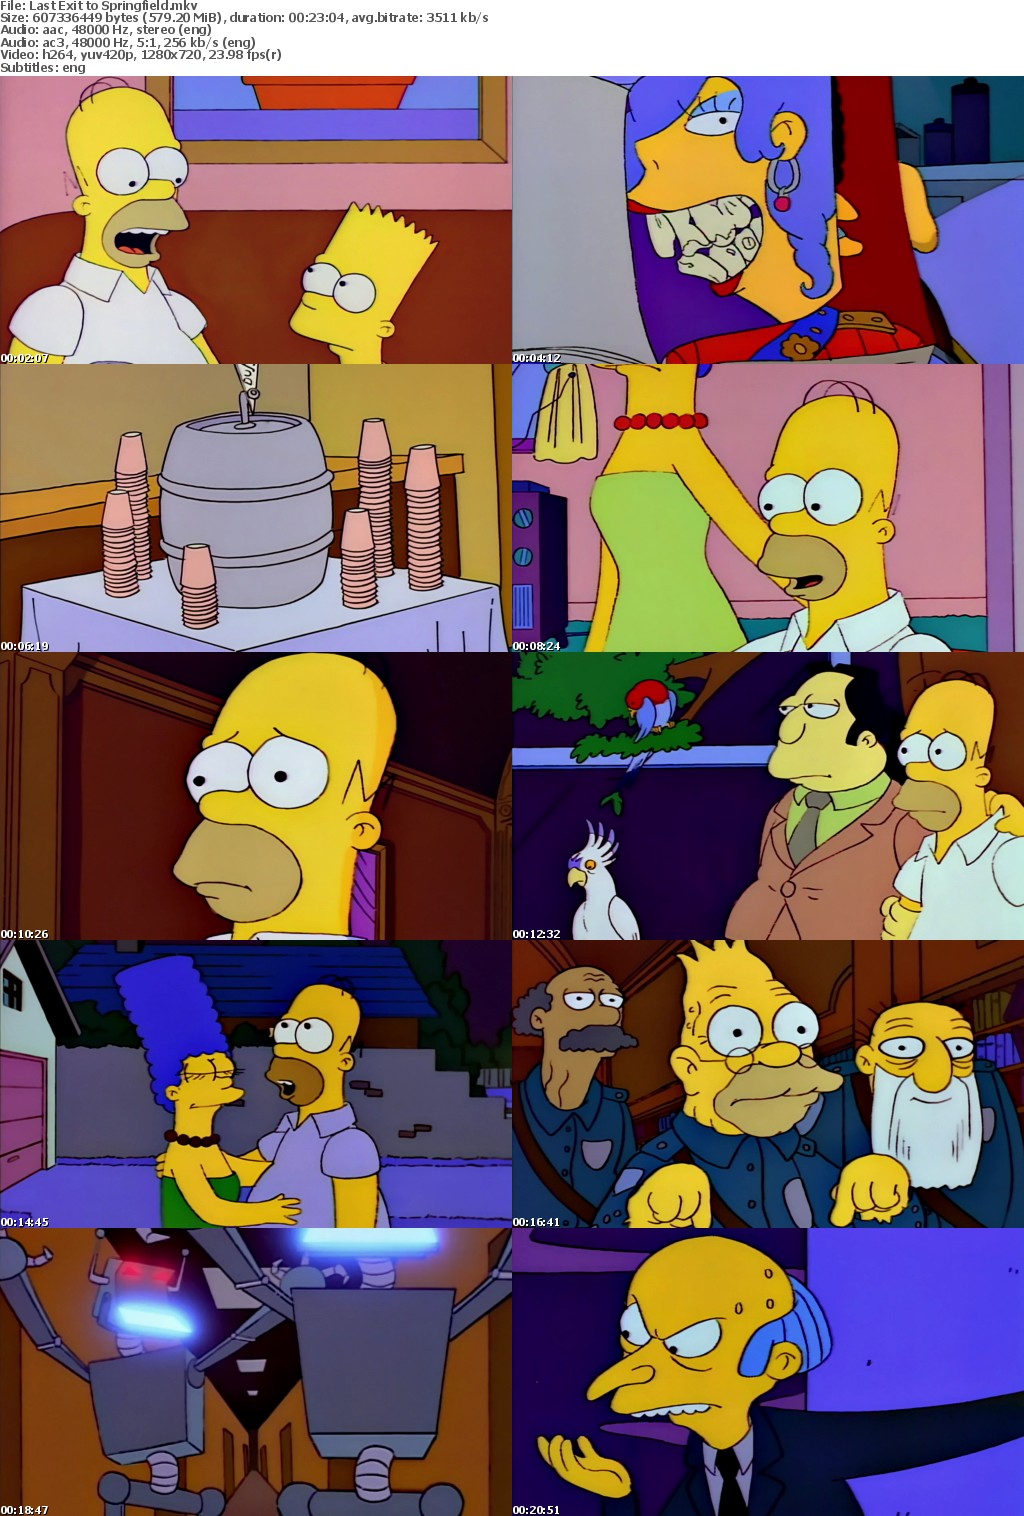 The Simpsons S4 E17 Last Exit to Springfield MP4 720p H264 WEBRip EzzRips